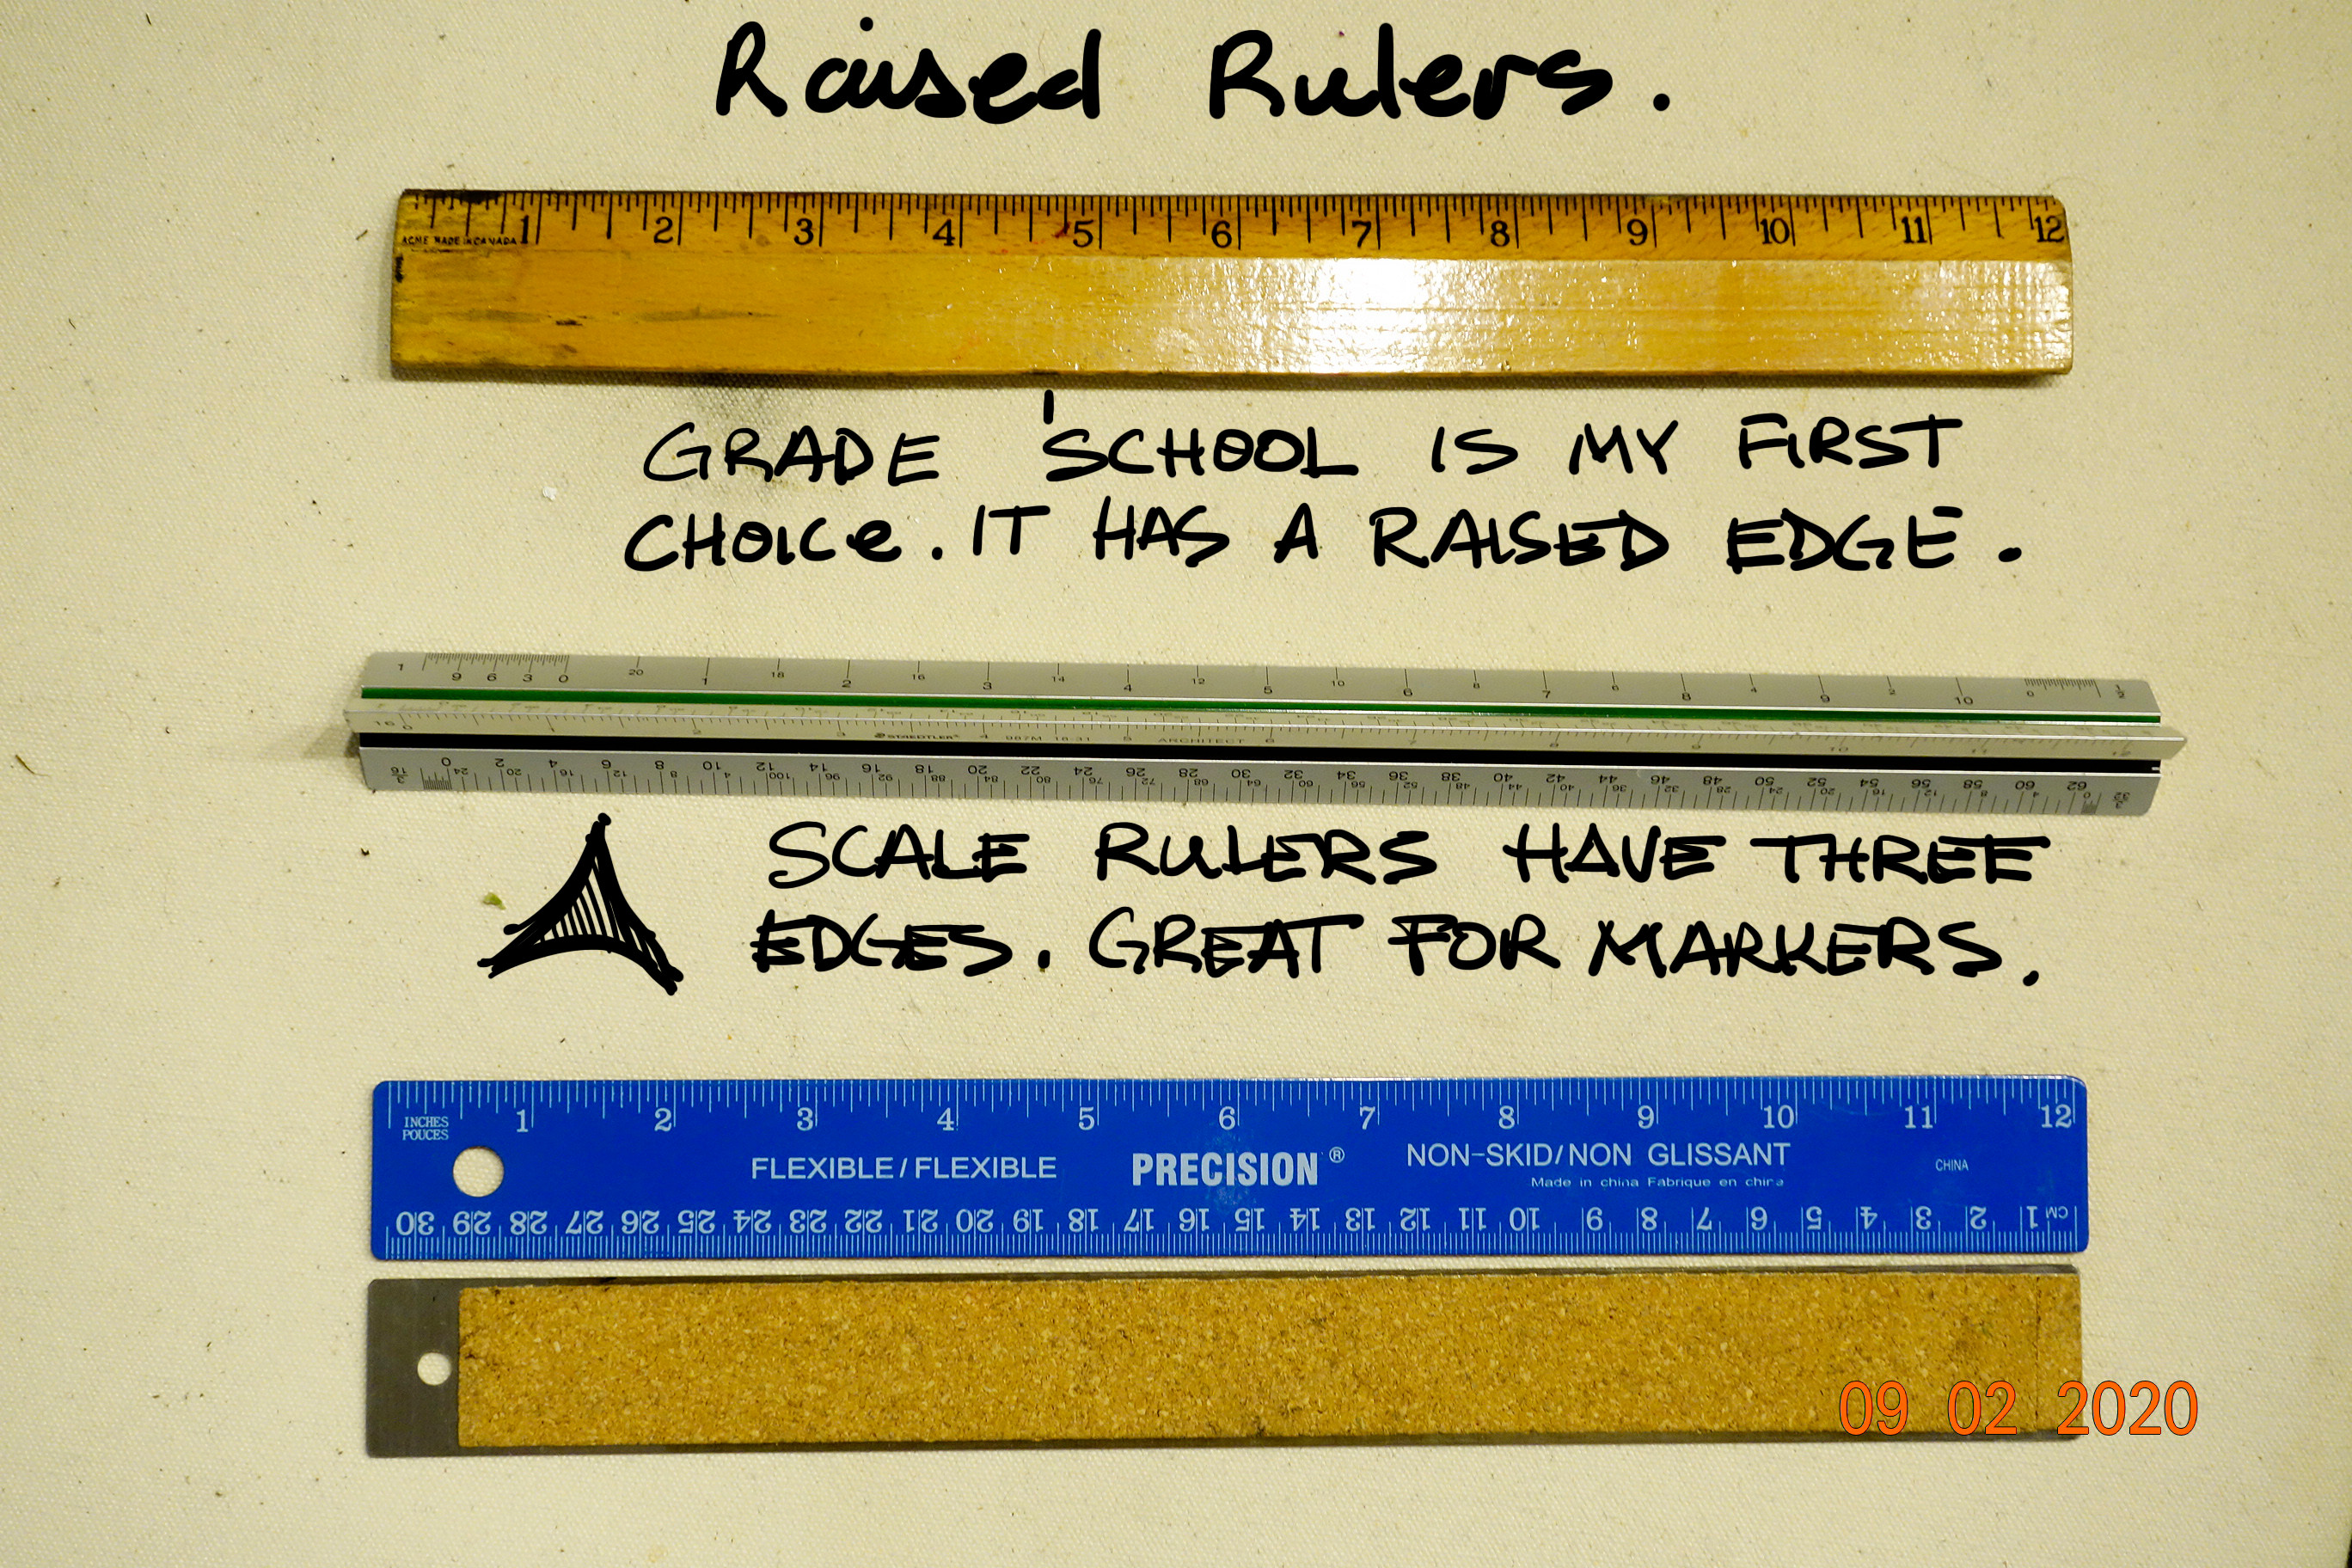 We use rulers for more than just measuring. I prefer a grade school ruler because of it's feel in my hands. When I want to draw a straight line with a brush, a shaped ruler that is raised acts as a great bridge for detailing with a brush.